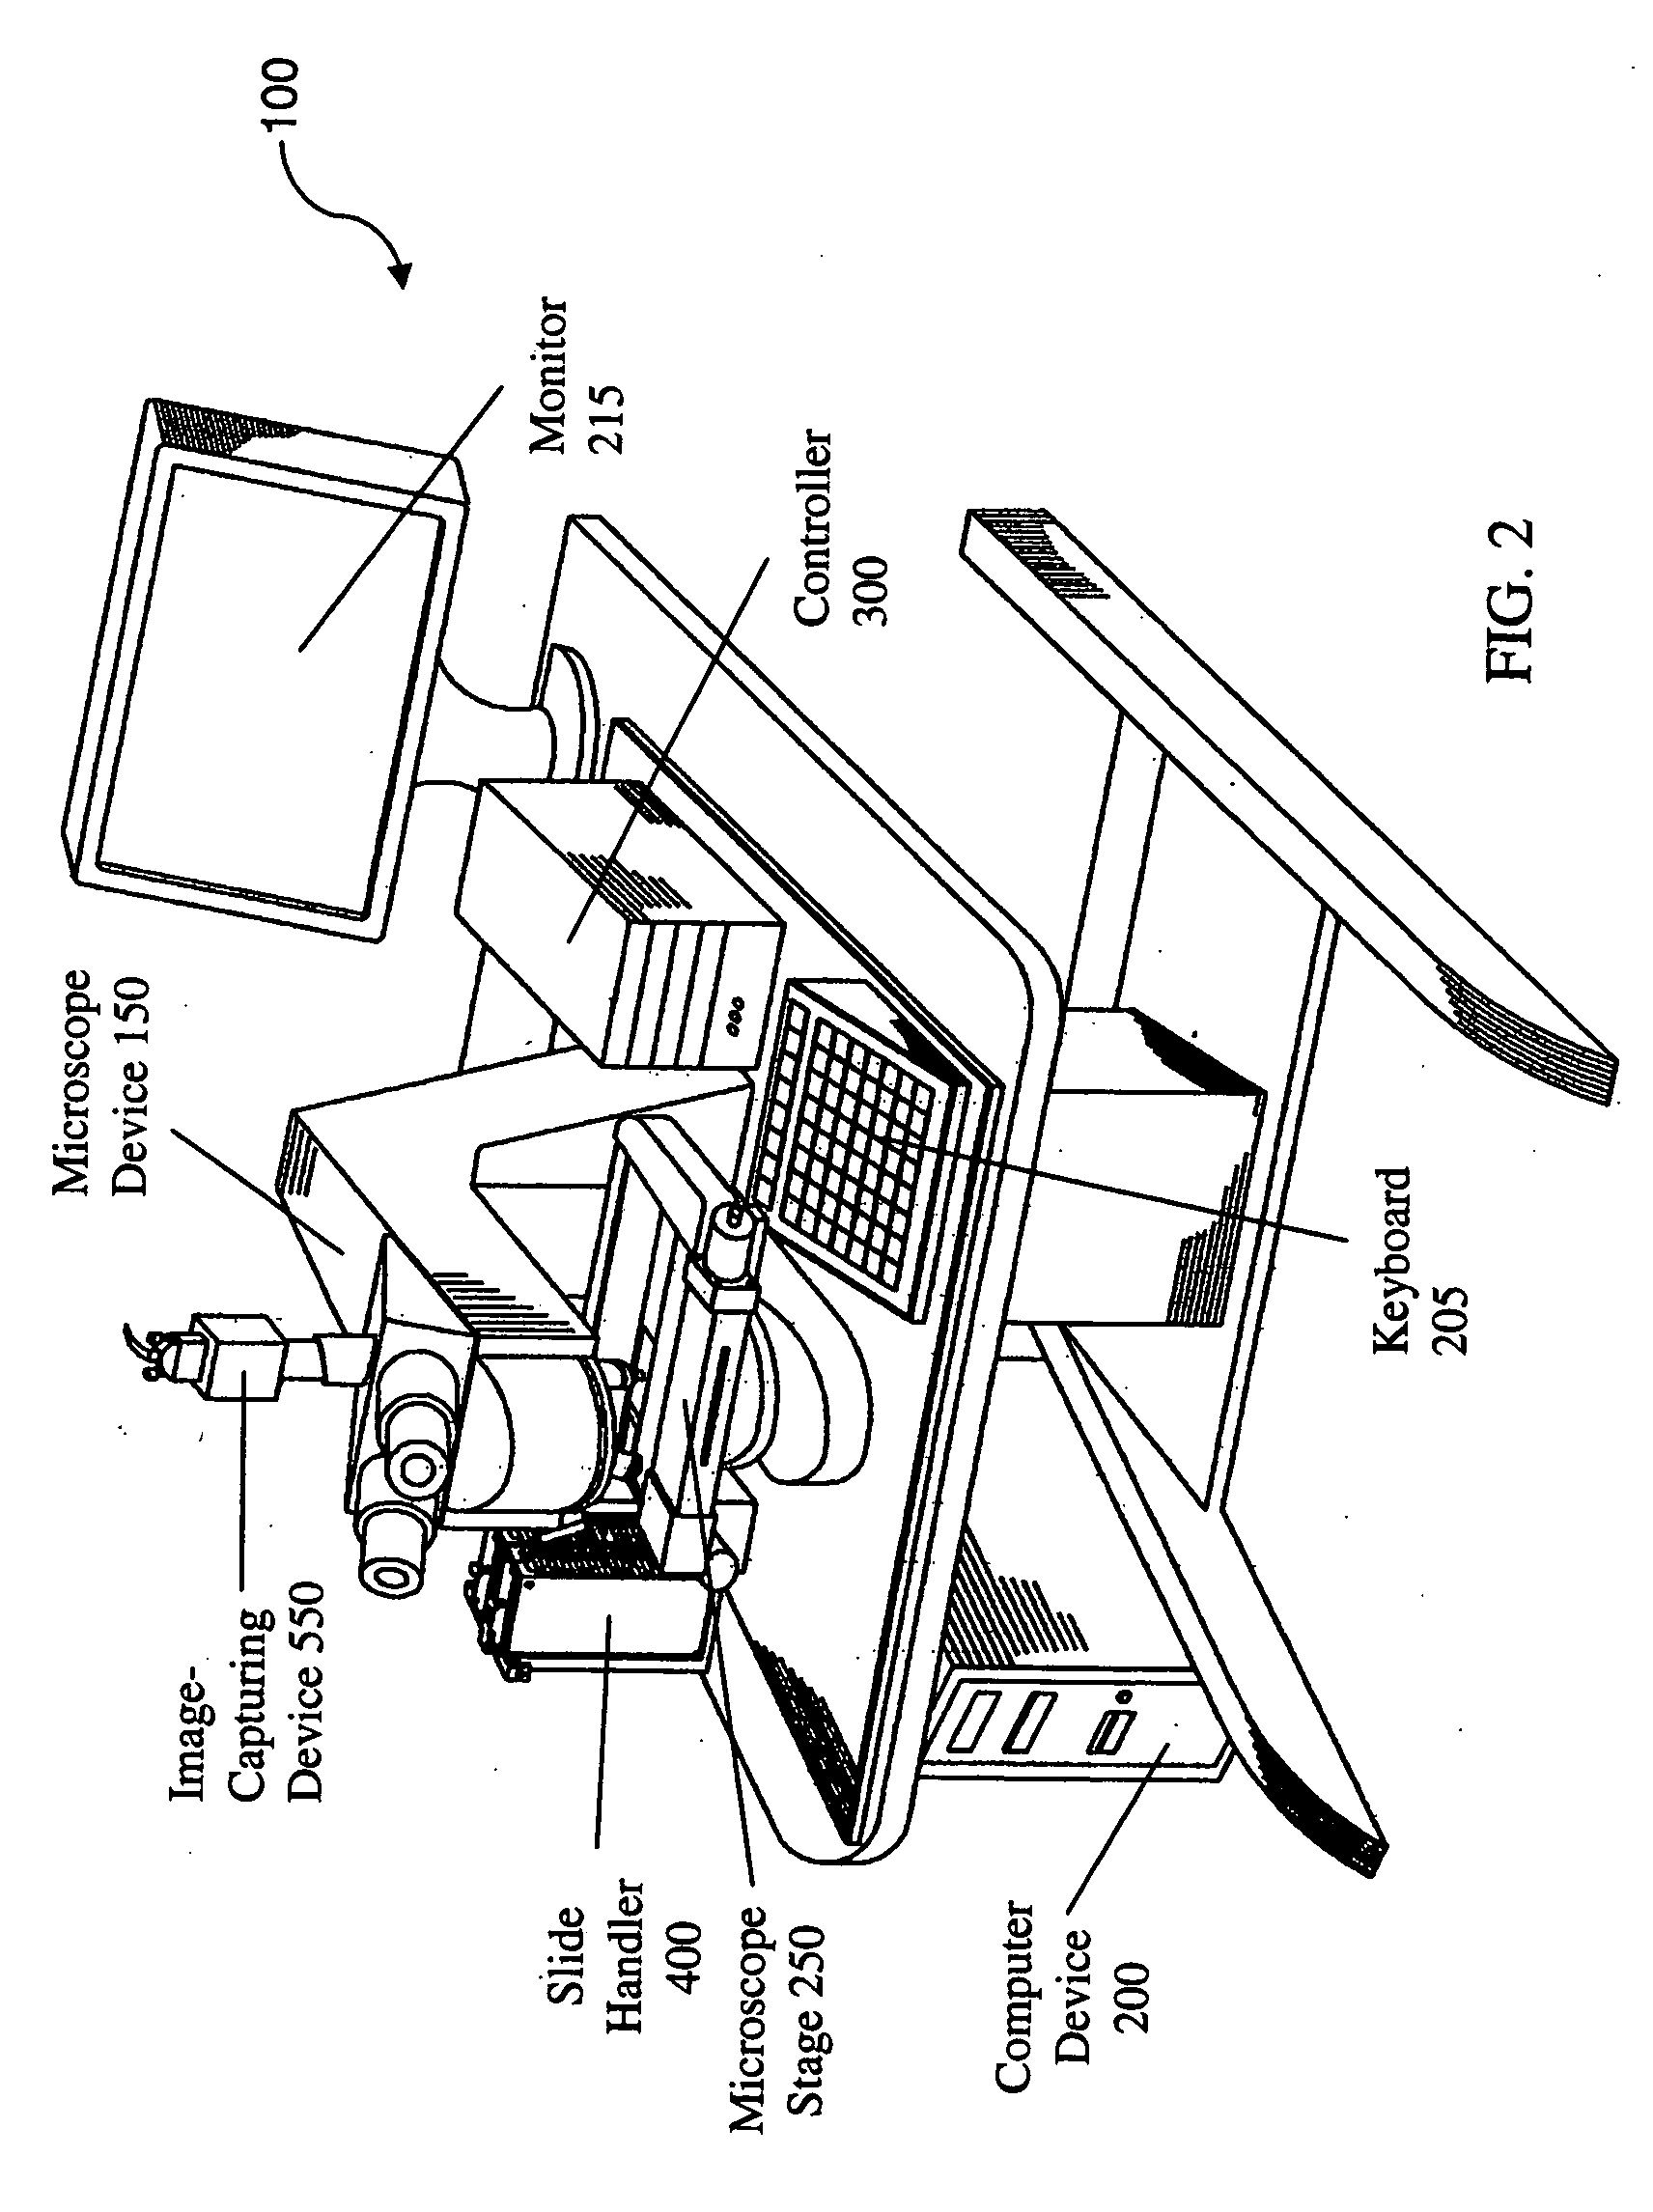 Microscopy system having automatic and interactive modes for forming a magnified mosaic image and associated method